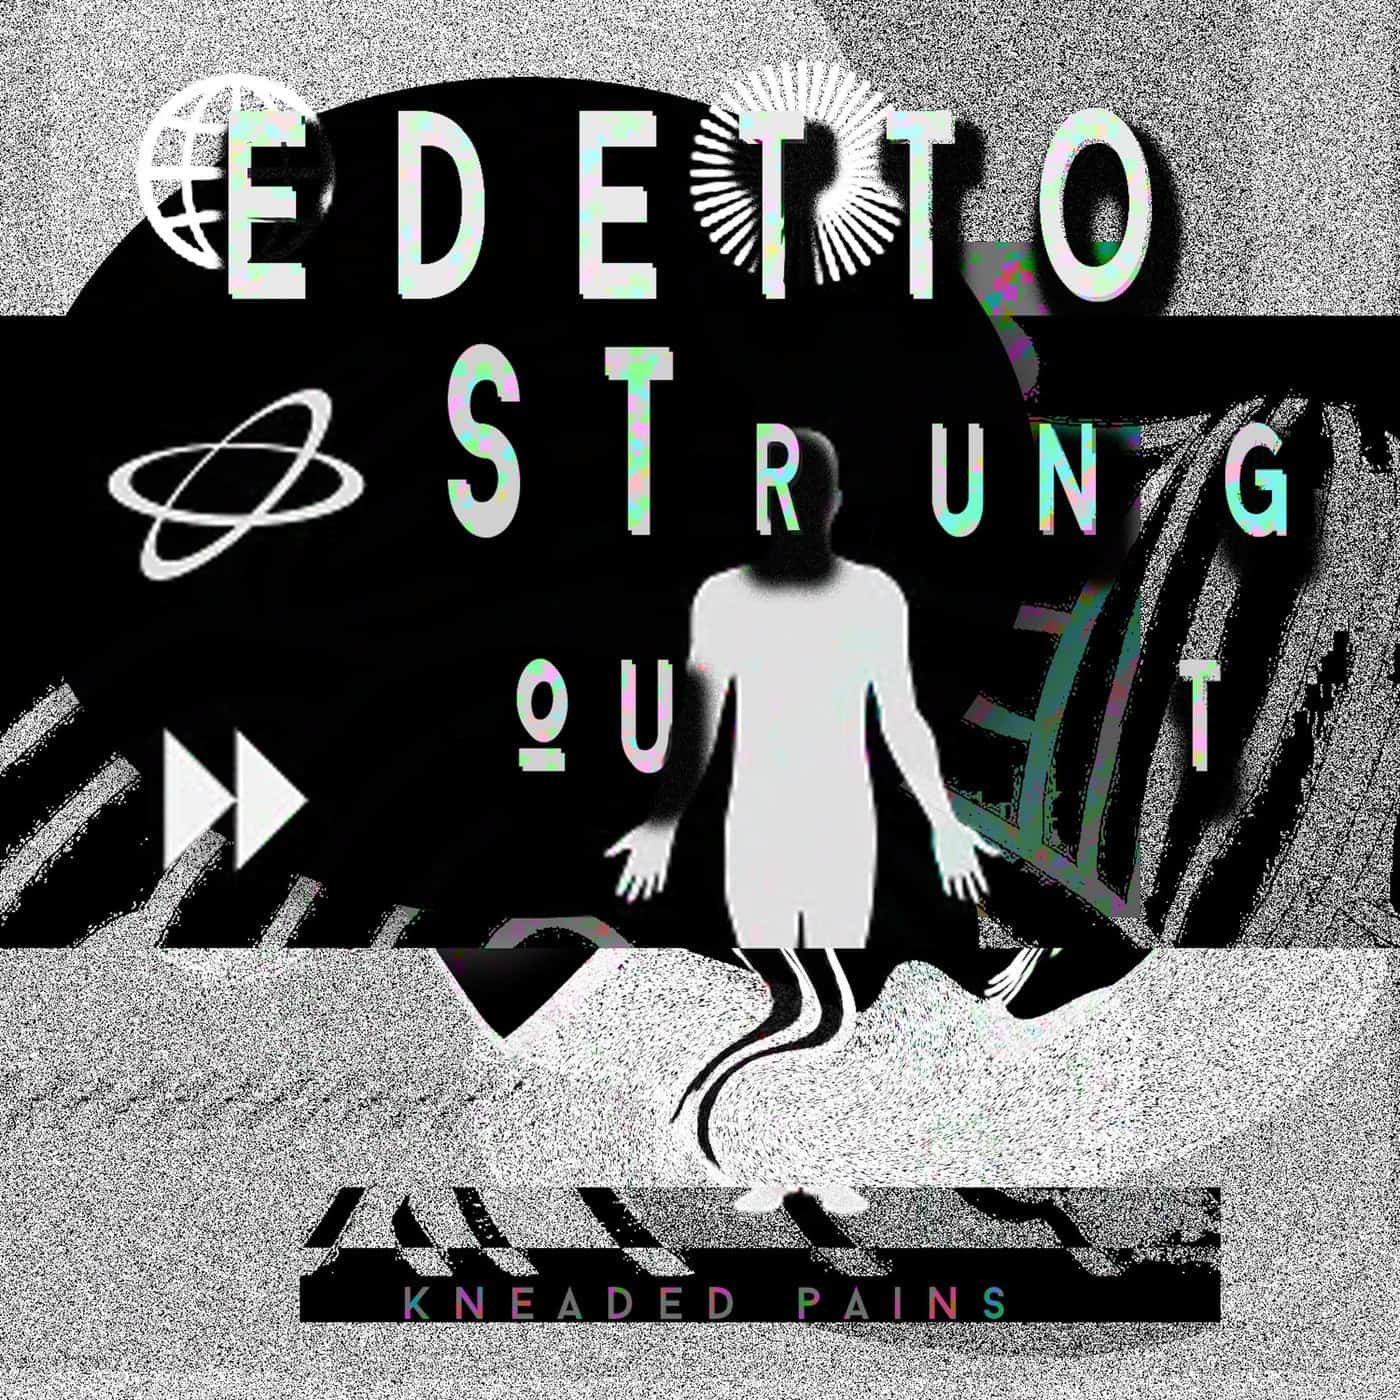 Download edetto - Strung Out EP on Electrobuzz